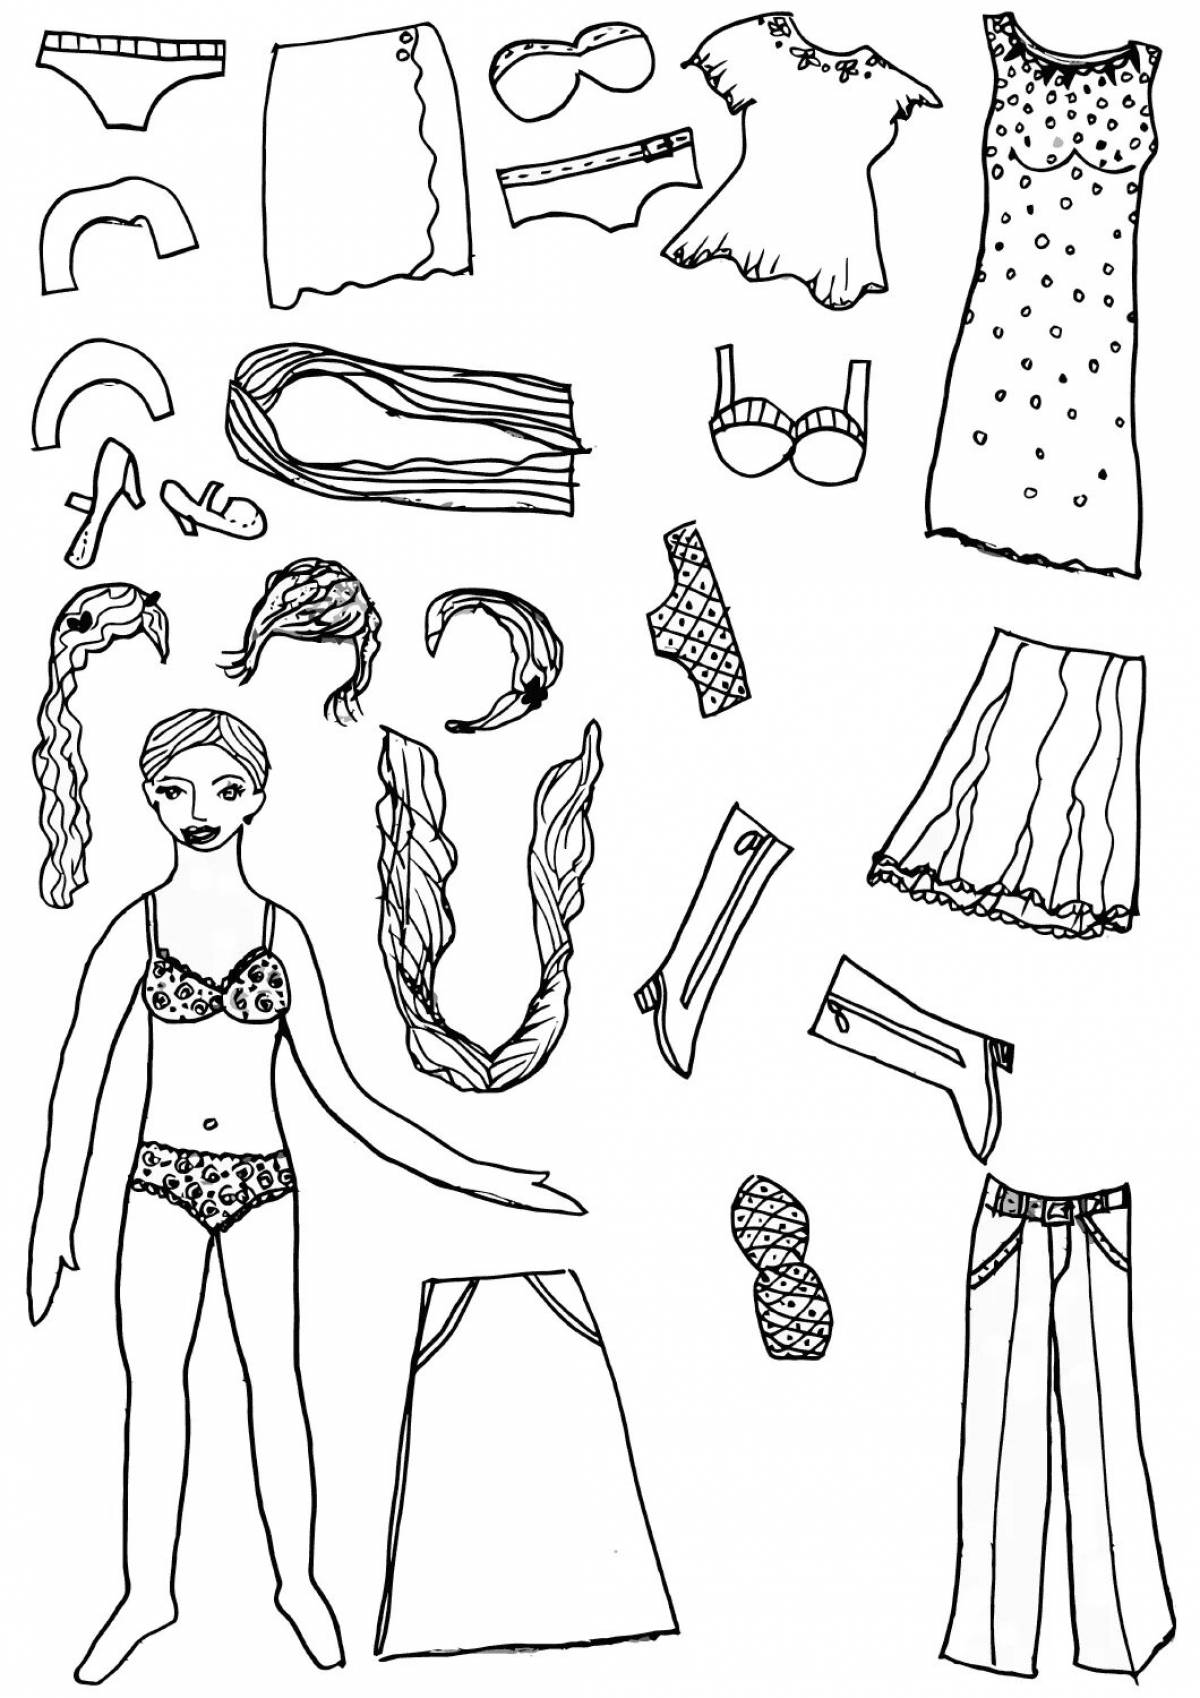 Barbie paper doll with cut out clothes #1